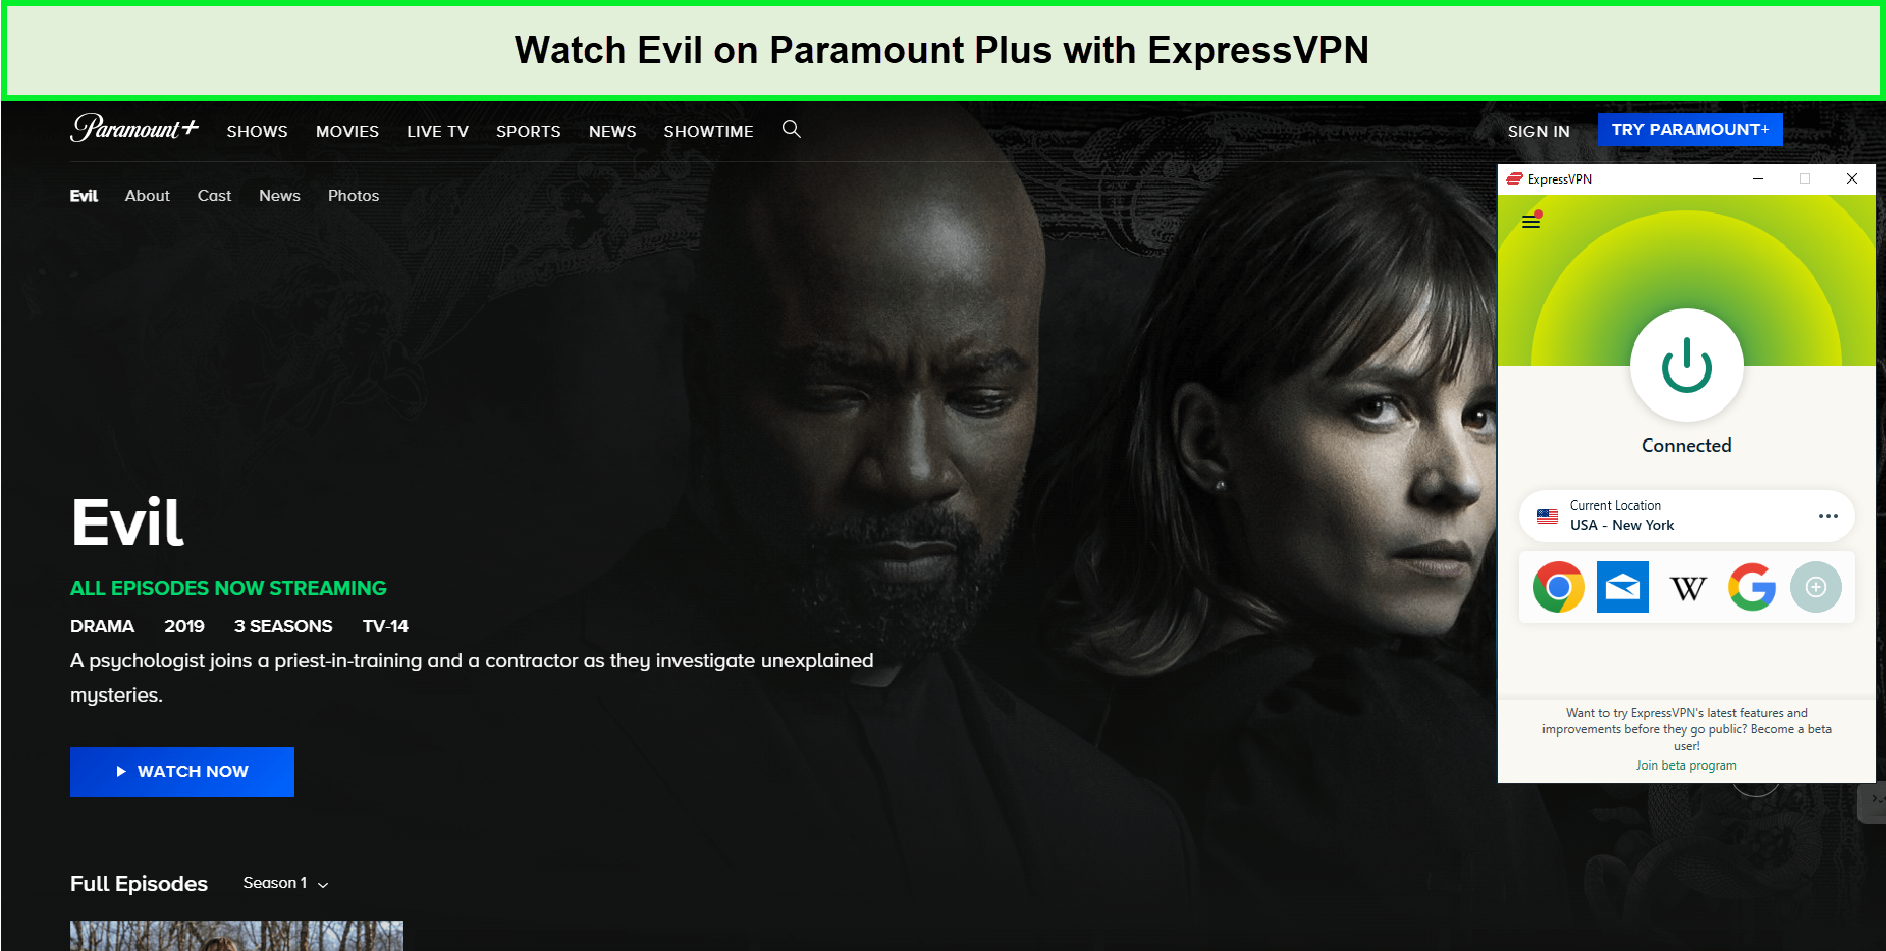 Watch-Evil-All-Seasons-in-South Korea-on-Paramount-Plus-with-ExpressVPN